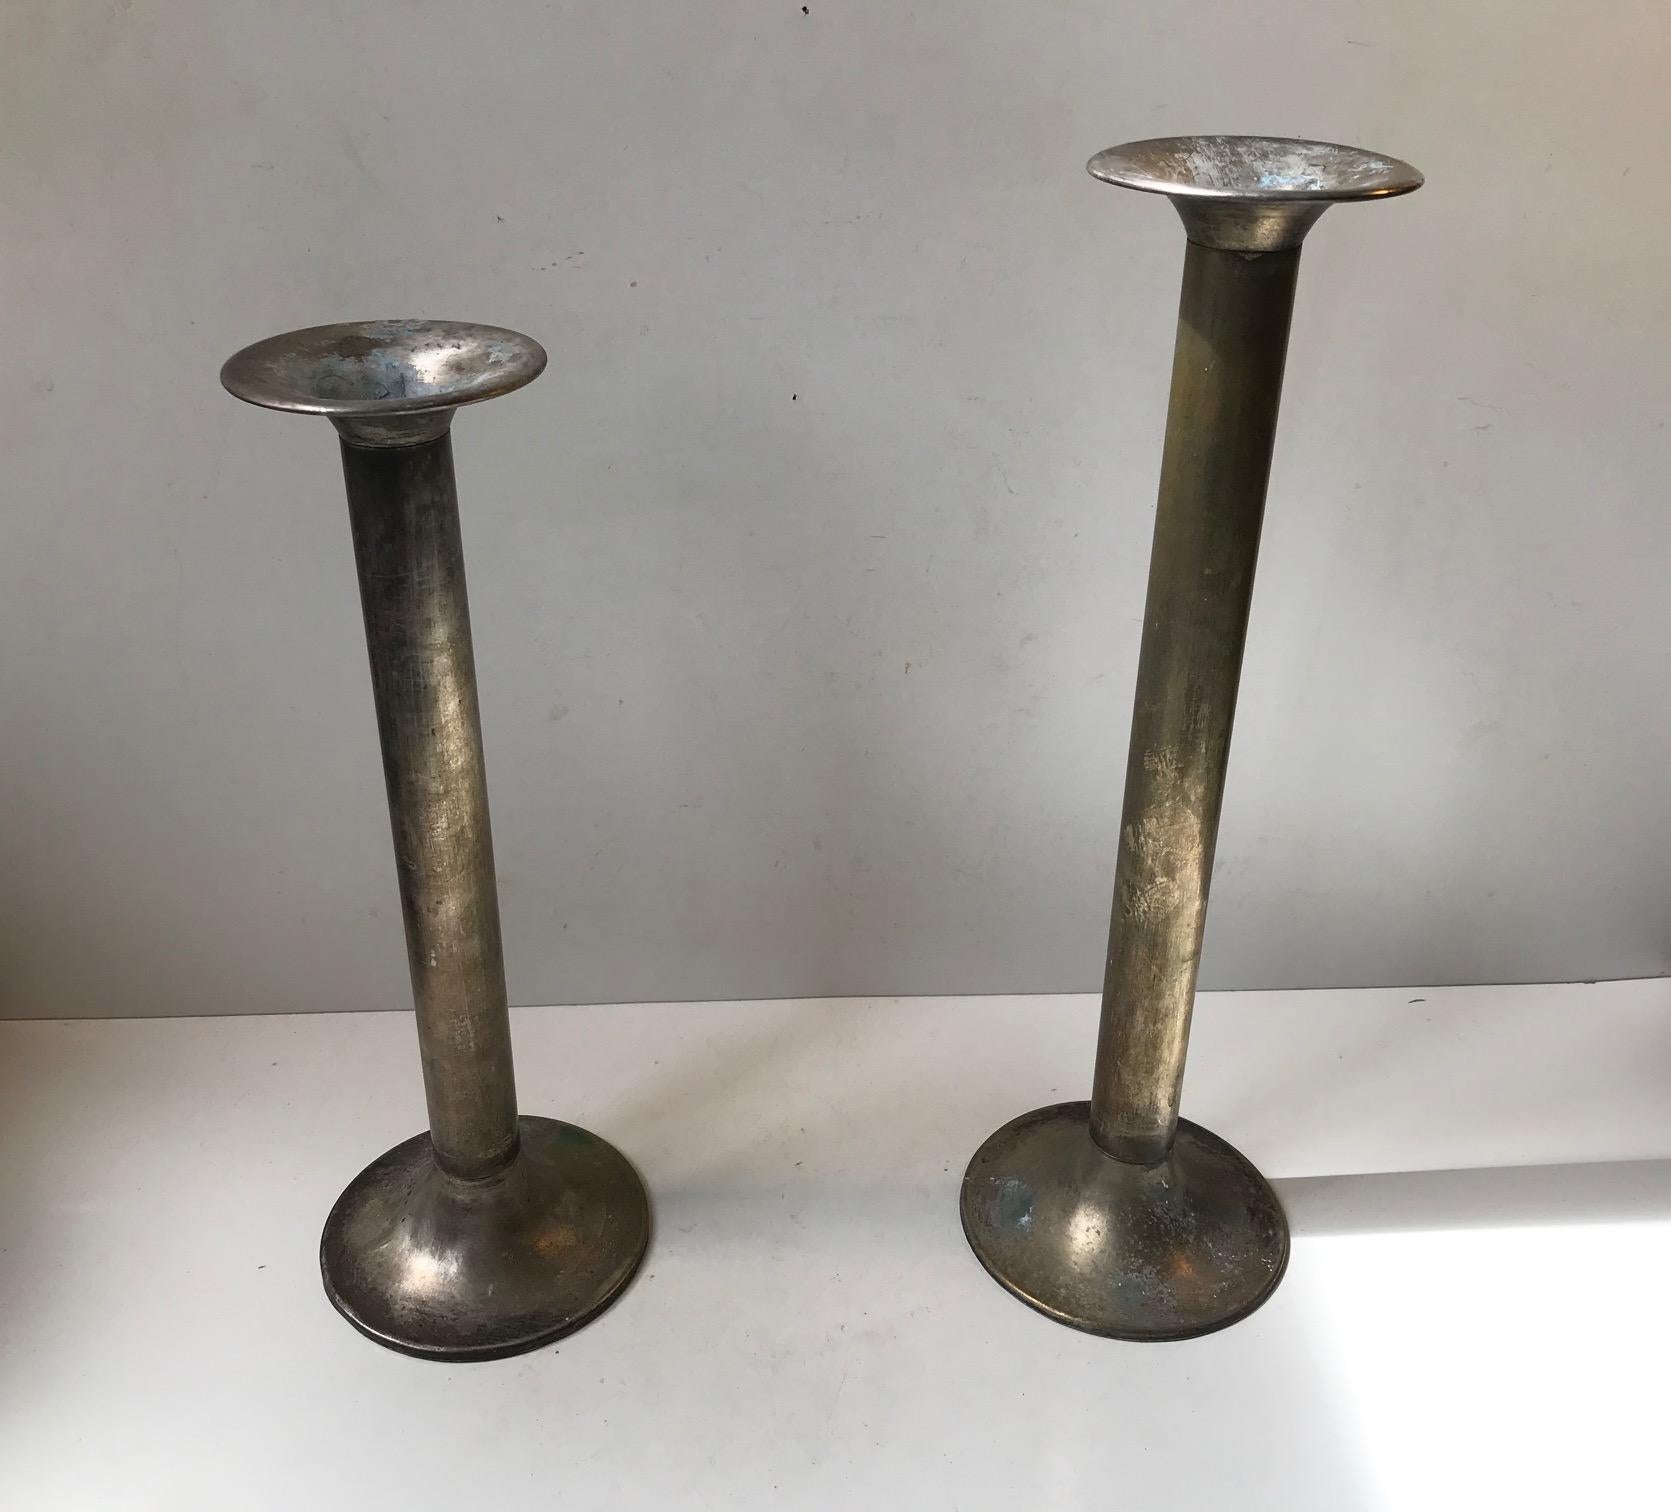 A pair of large antique church candlesticks I silver plated brass. These came out of a Church near Tjaeborg in the western part of Denmark. The design is very plain, peasantry and almost has an Art Deco appearance to them. They have not been